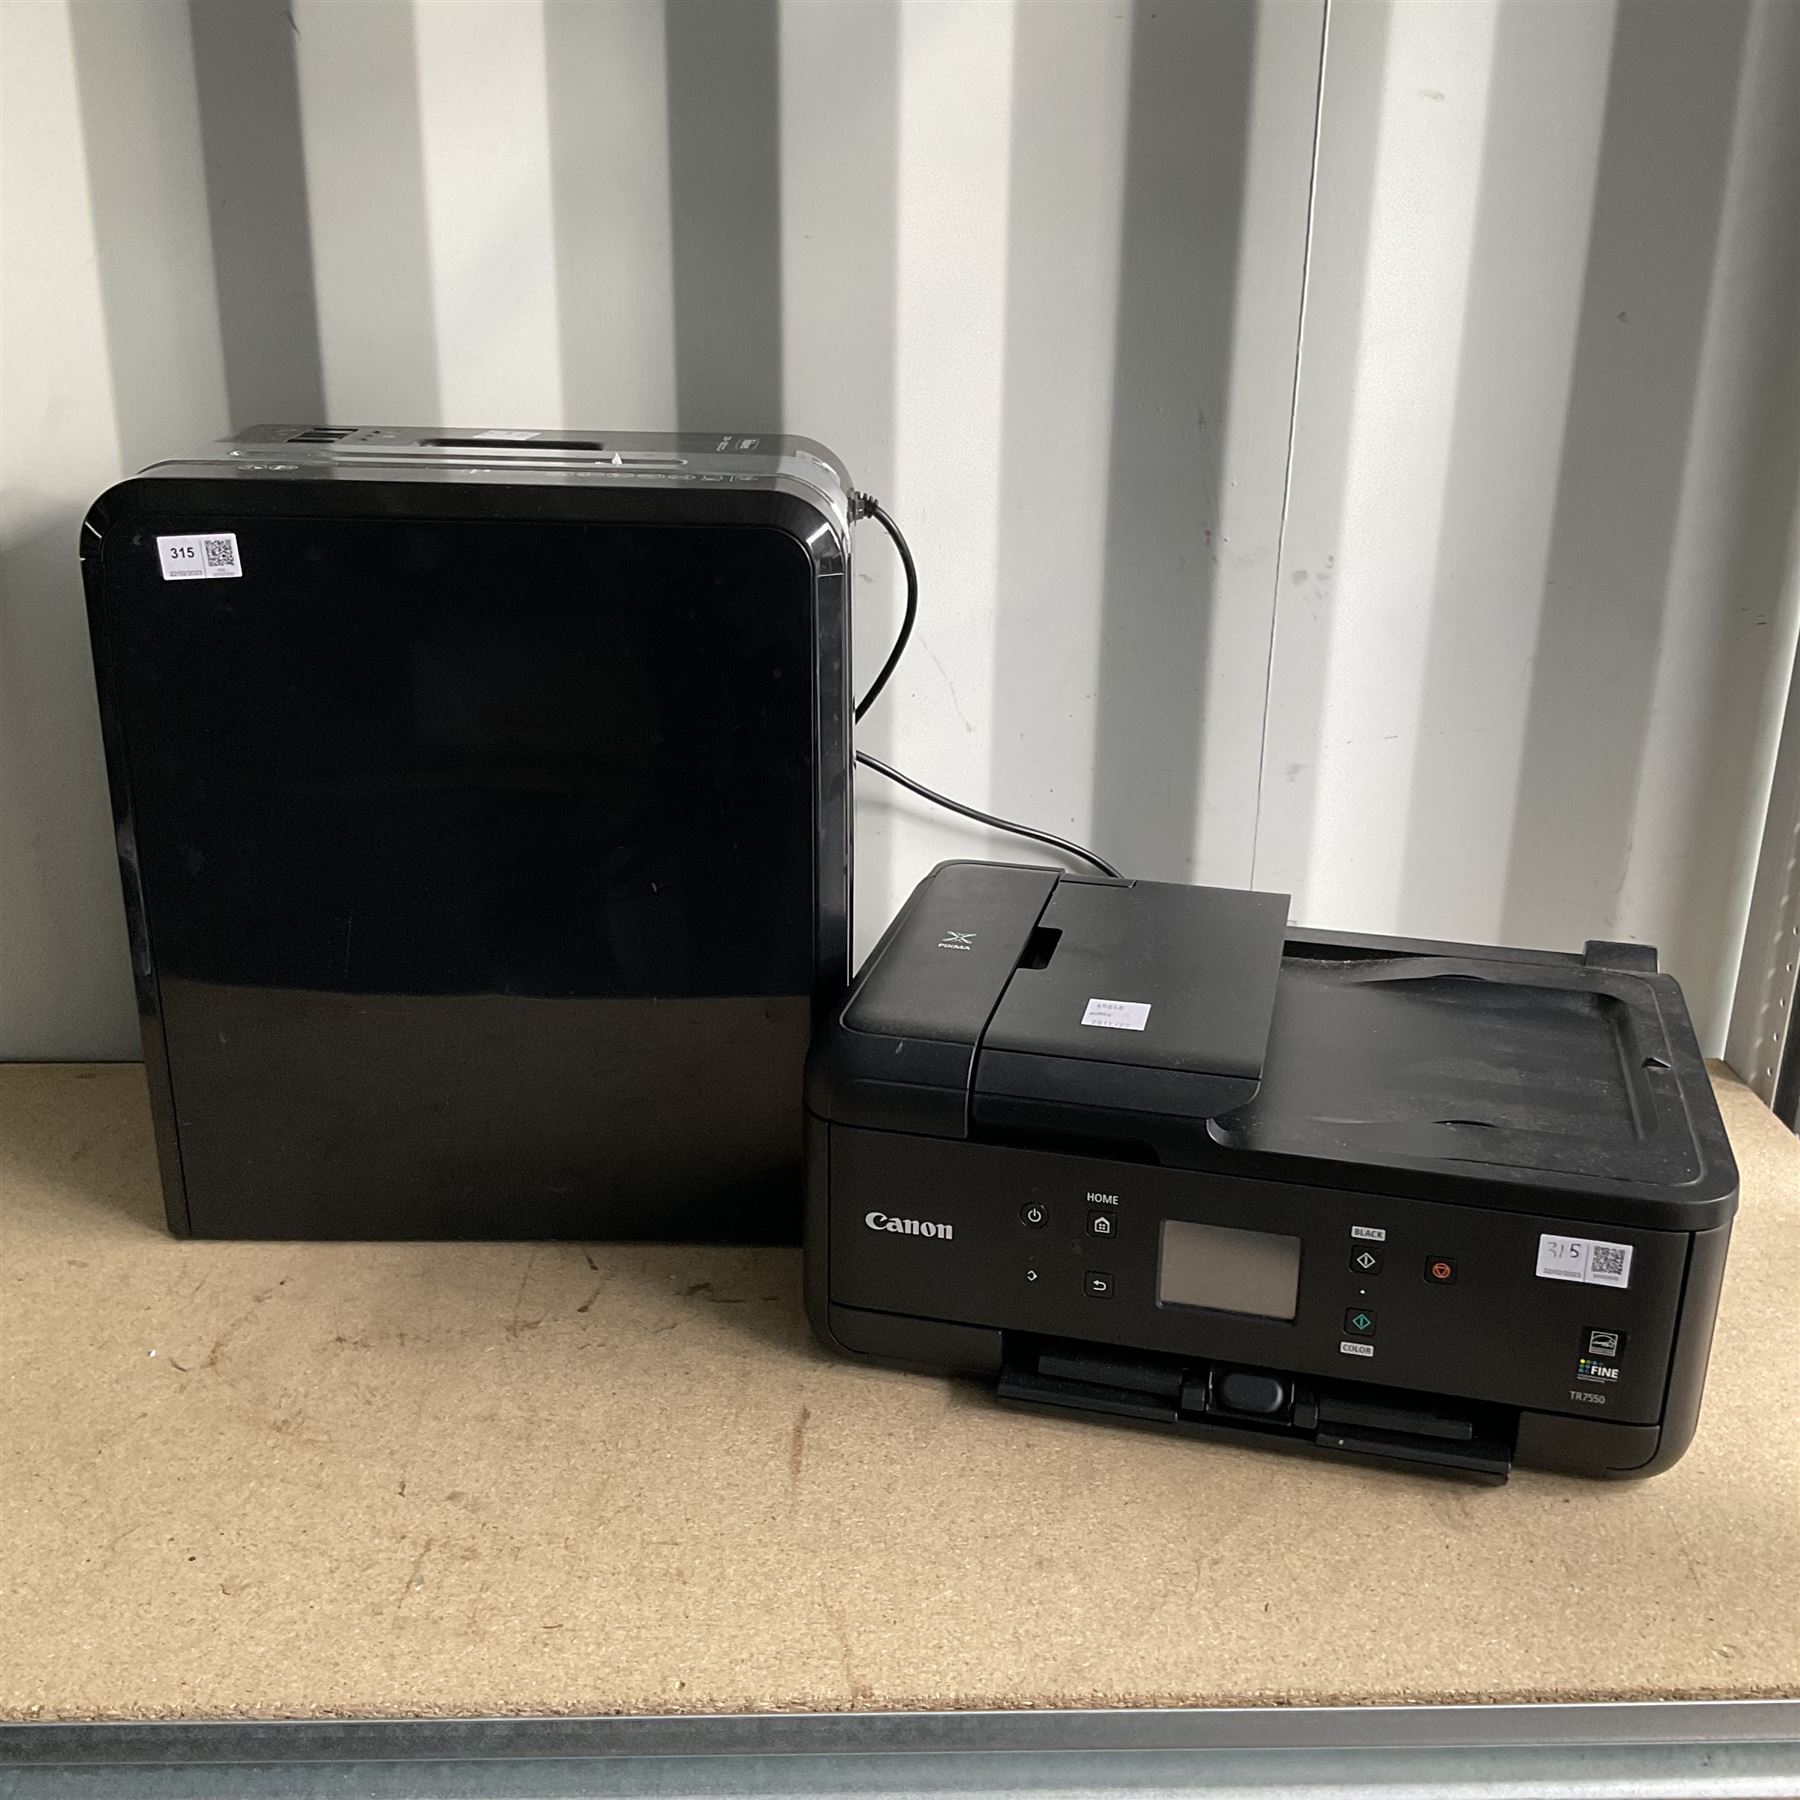 Canon TR7550 Printer and Fellowes DS1200Cs paper shredder - THIS